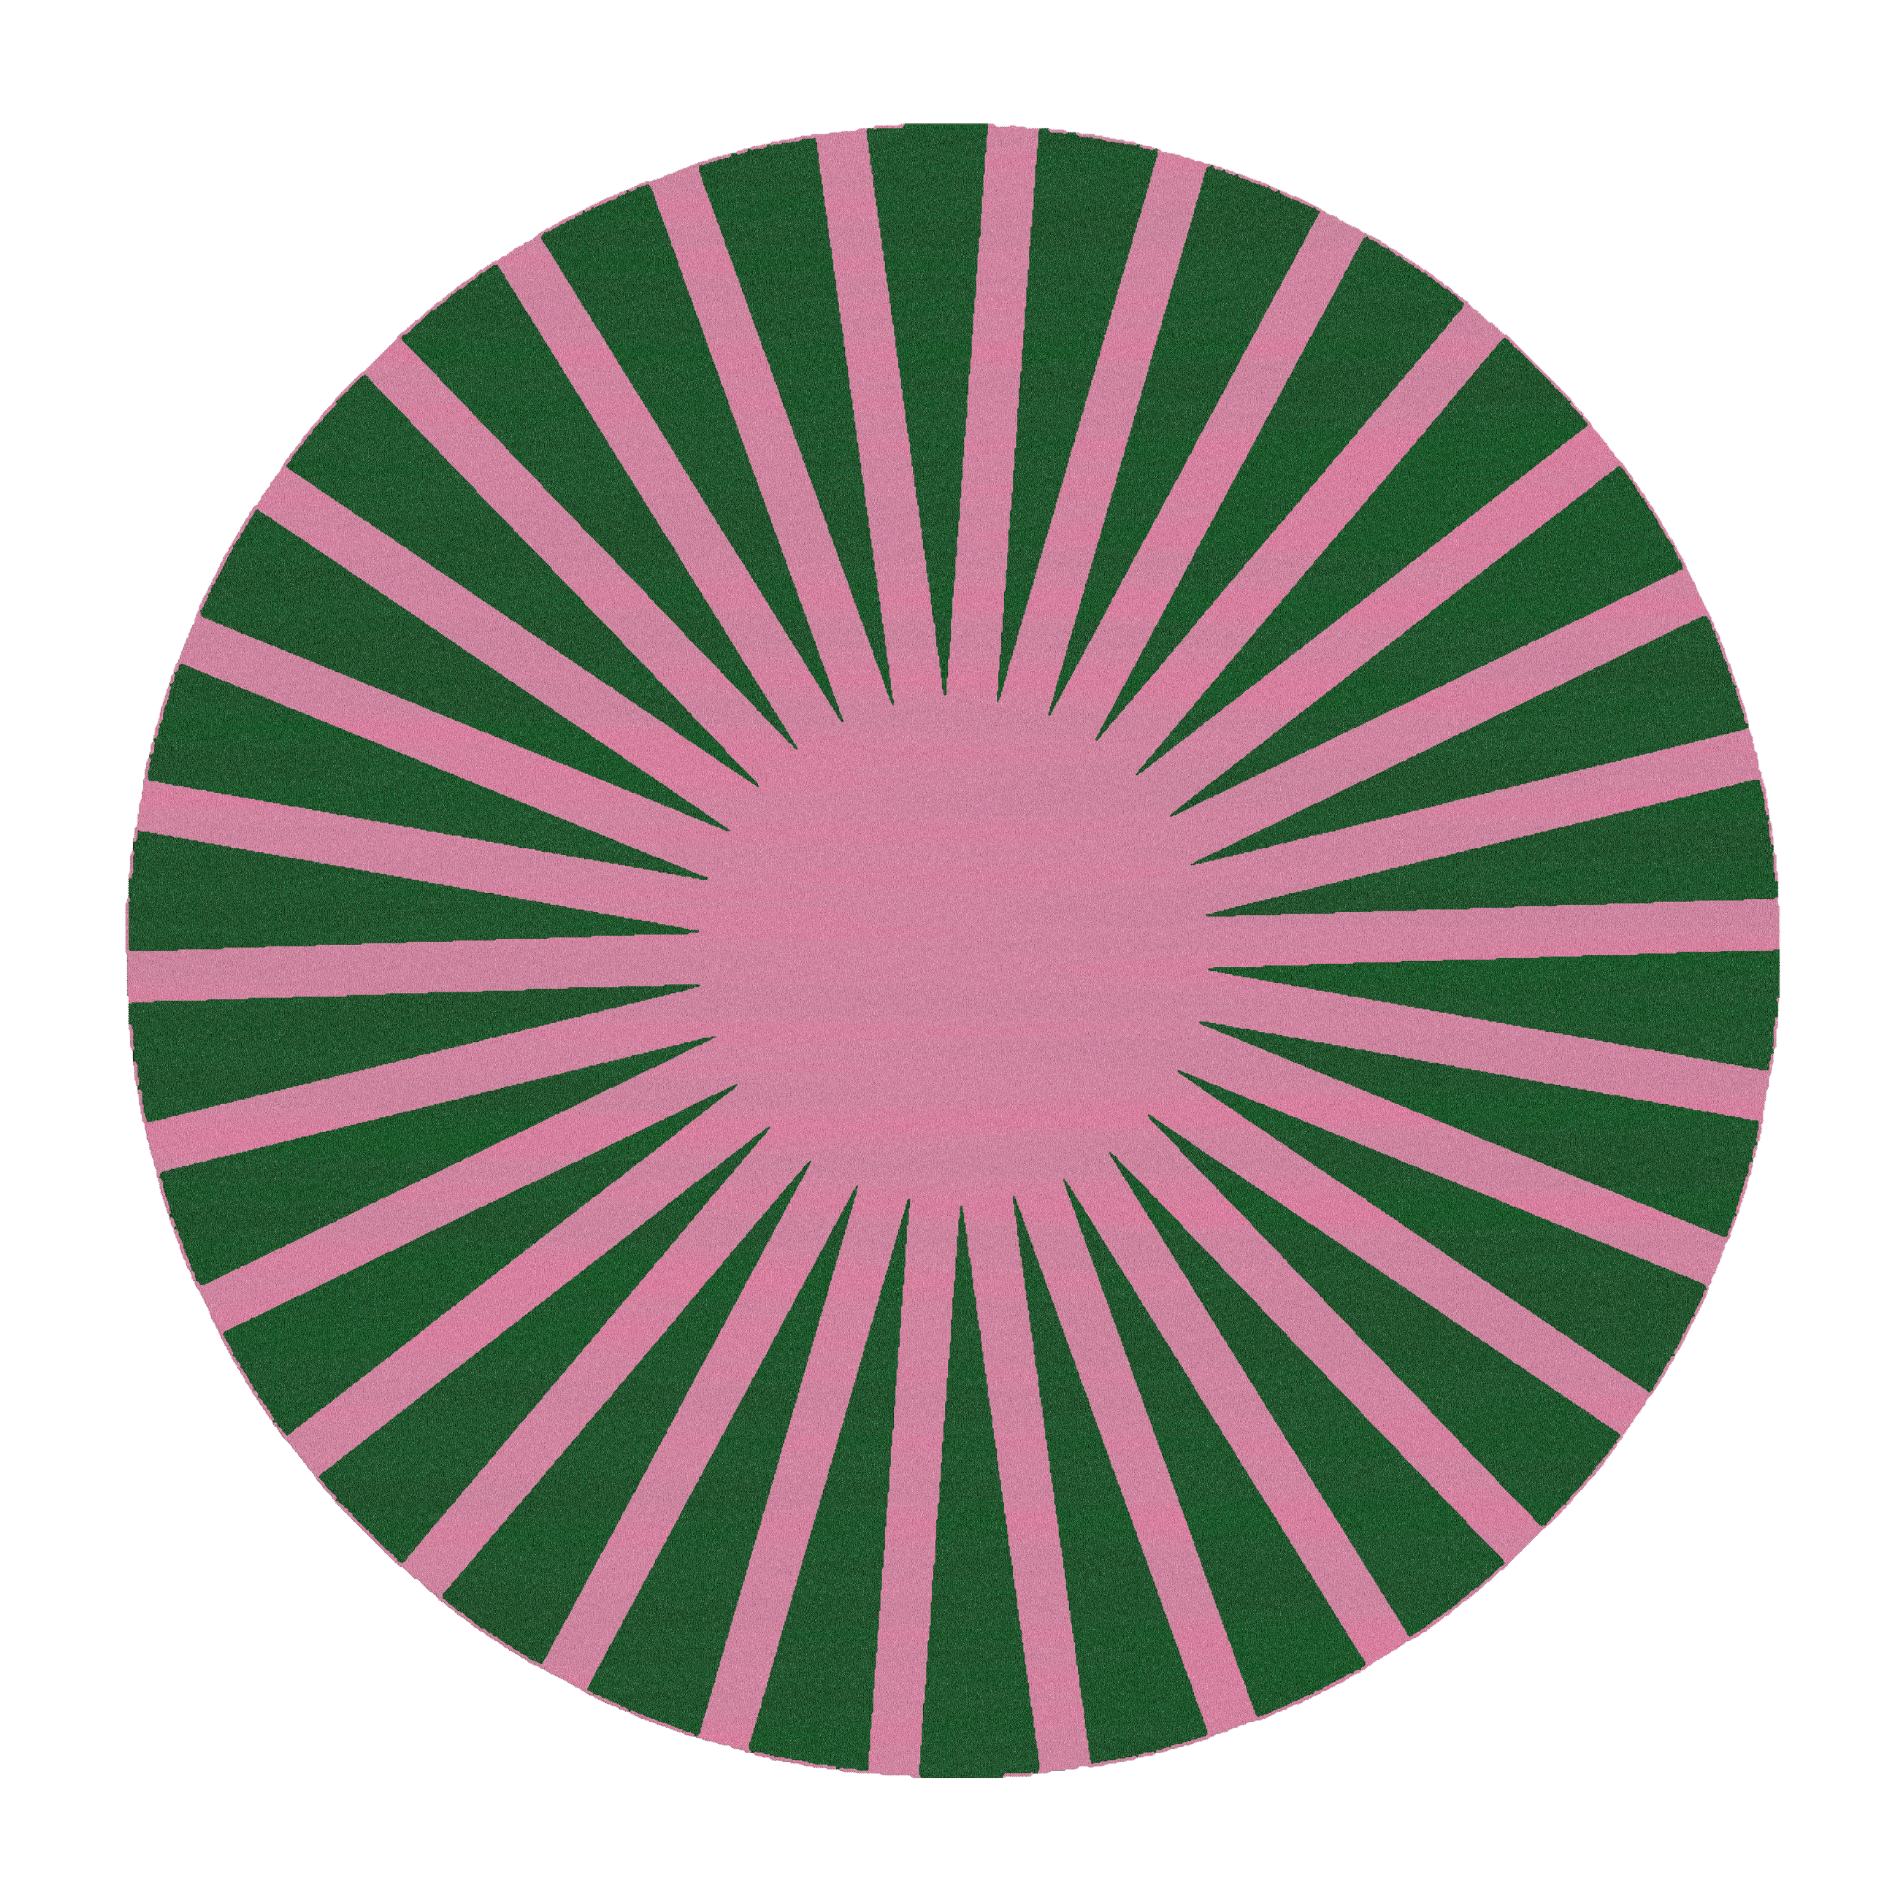 Revitalize your space with the Contemporary Green and Pink Ray Round Hand Tufted Wool Rug. Handcrafted with care, its vibrant colors and modern design add a touch of elegance to any room. Experience comfort and style with this exquisite statement piece